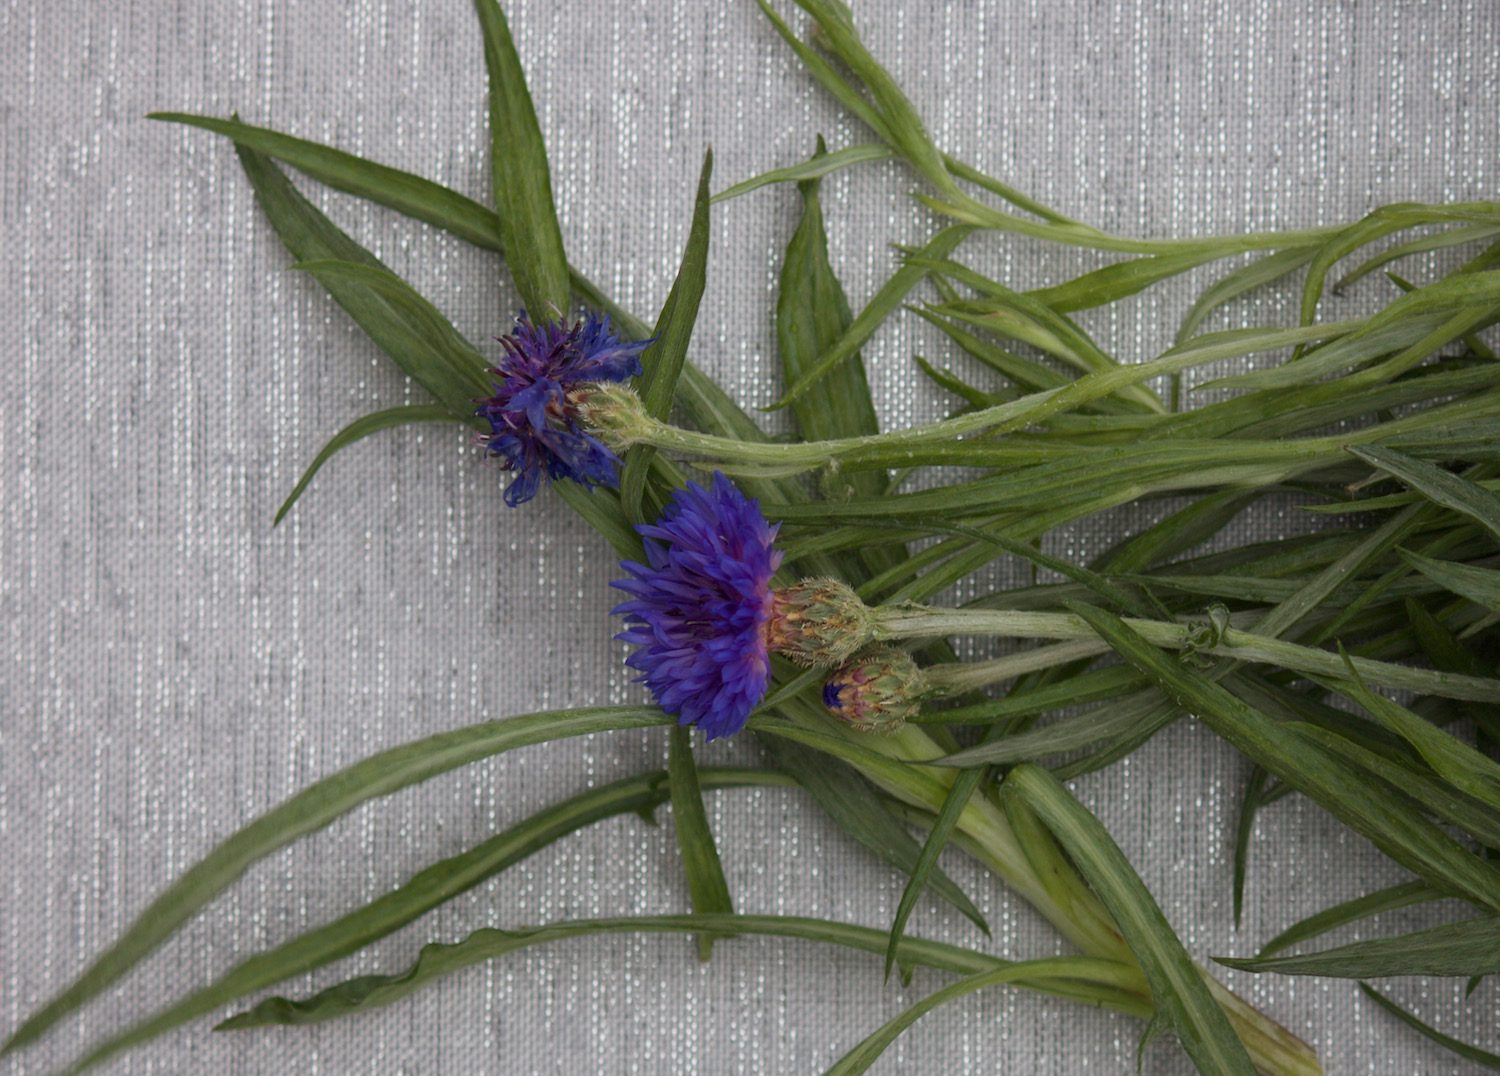 Cornflower photographed in our studio.